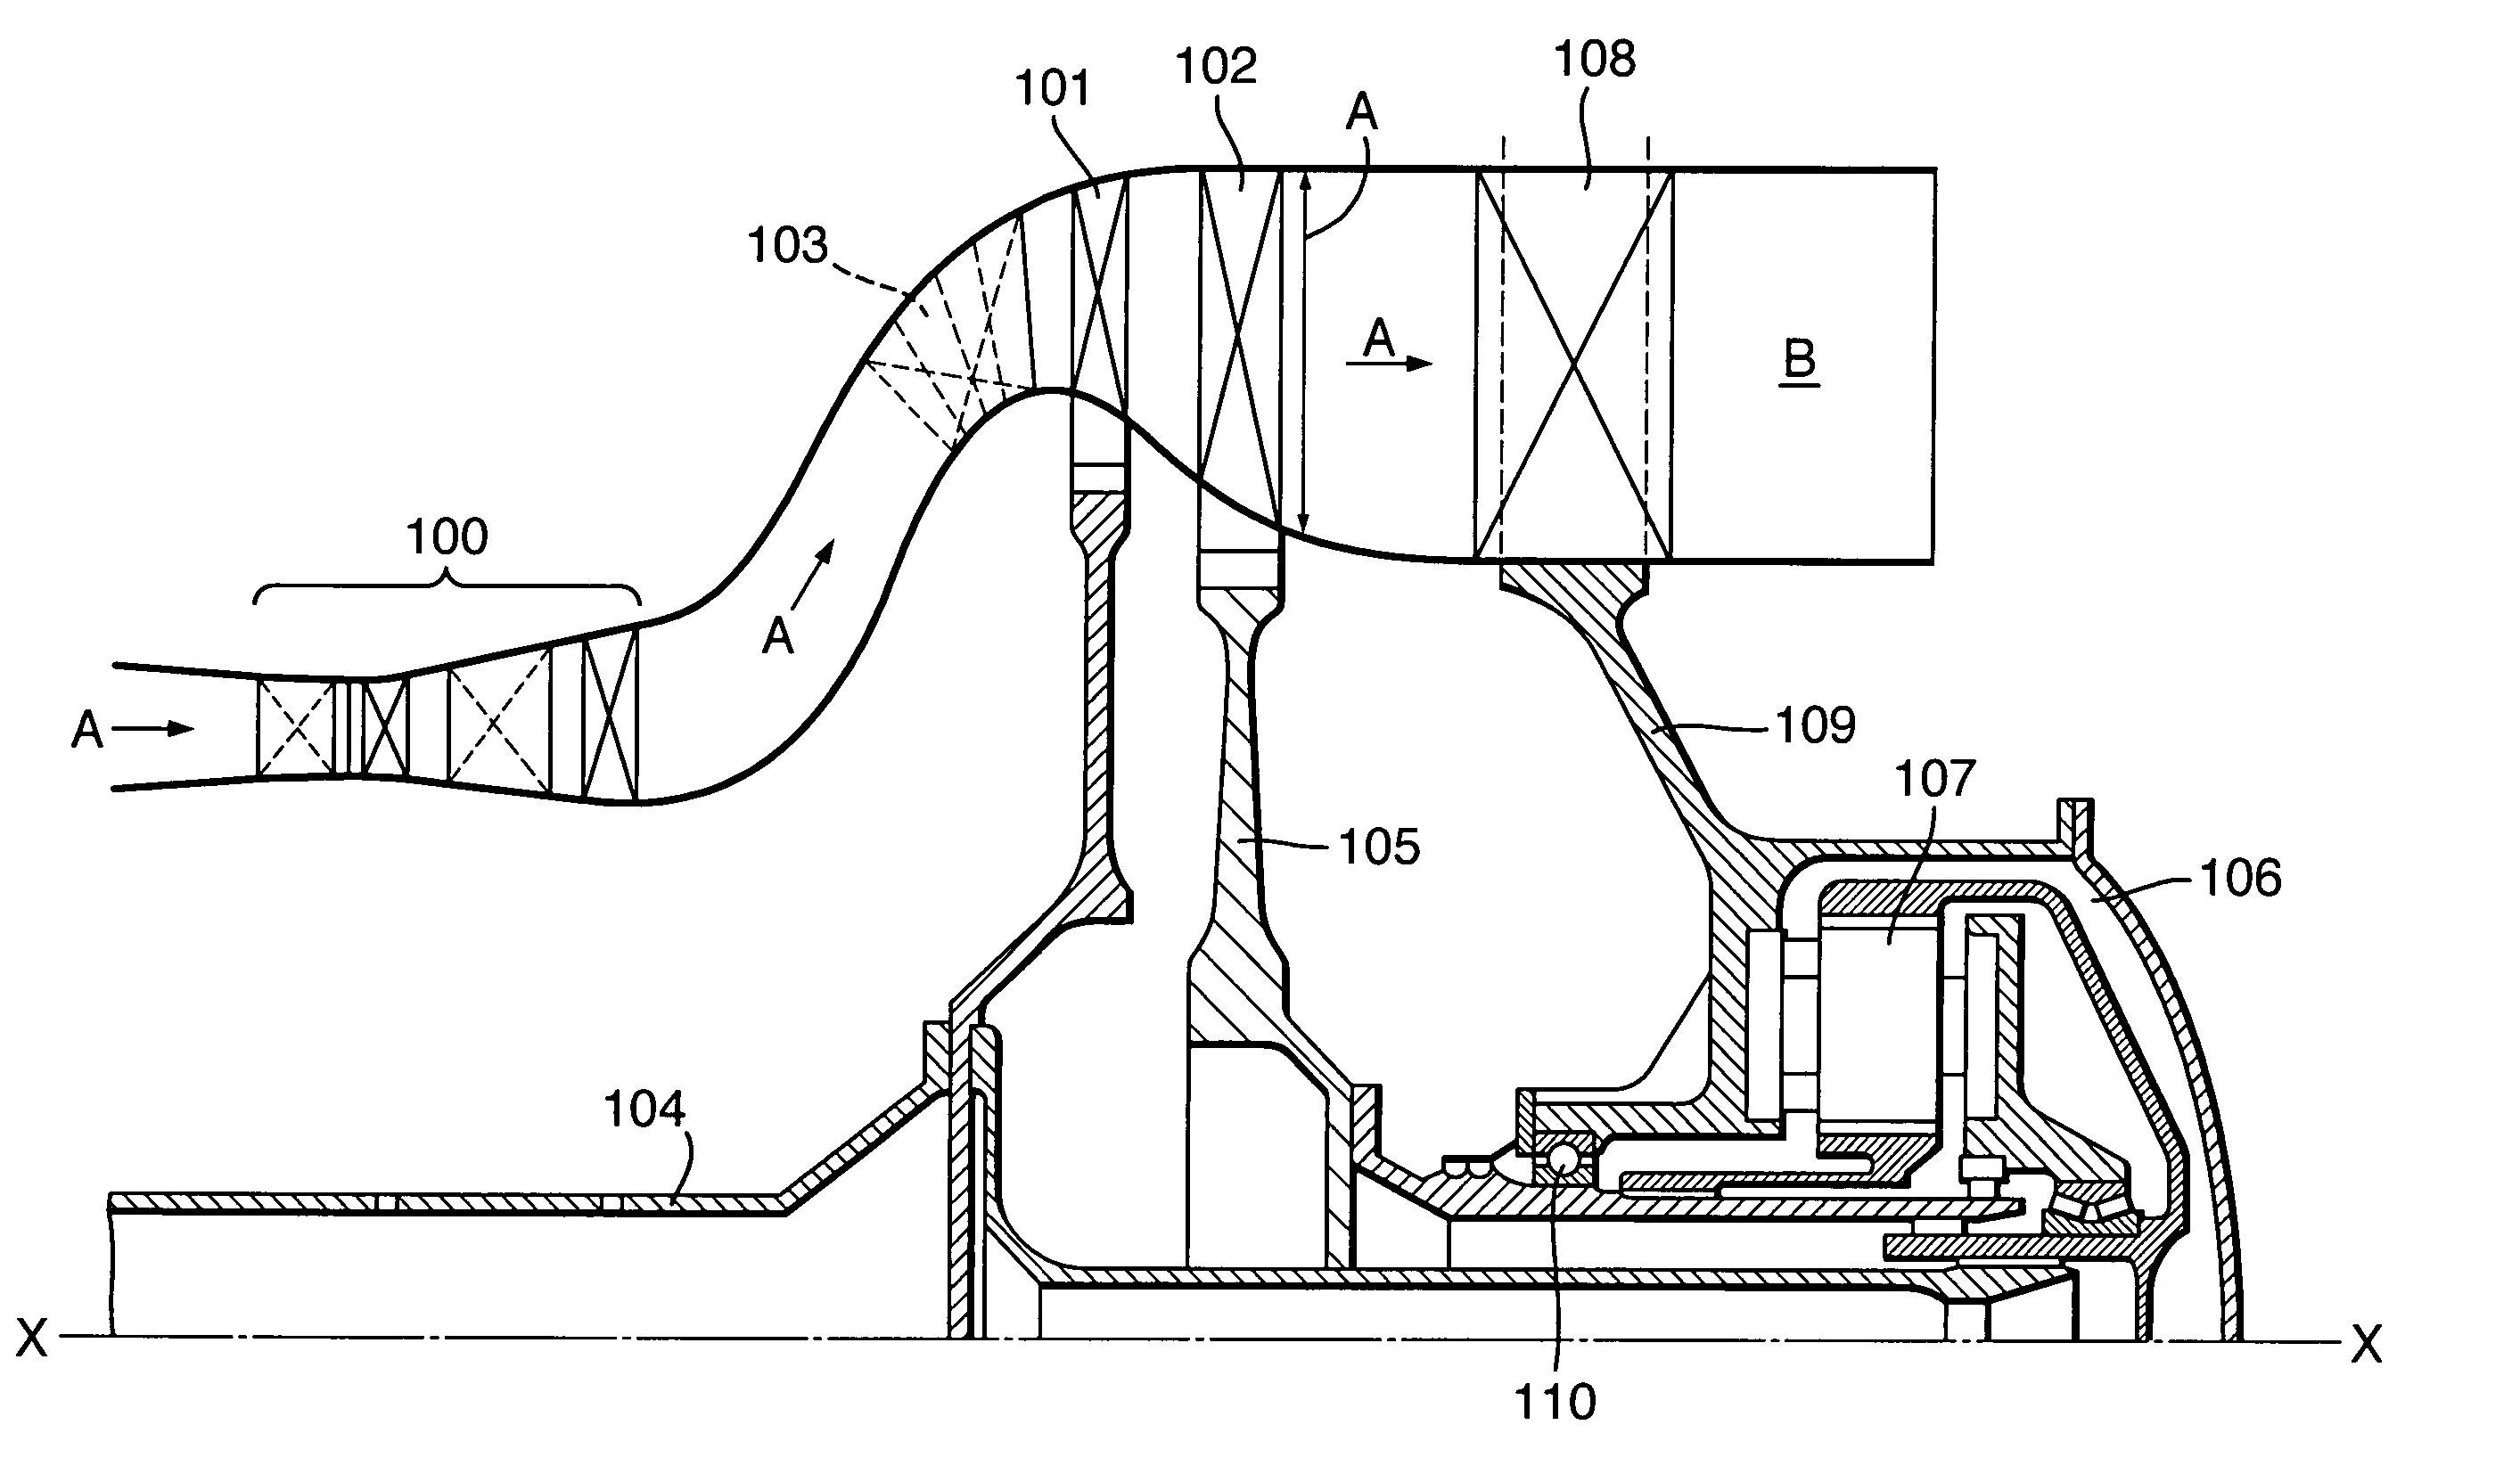 Counter-rotating turbine engine including a gearbox